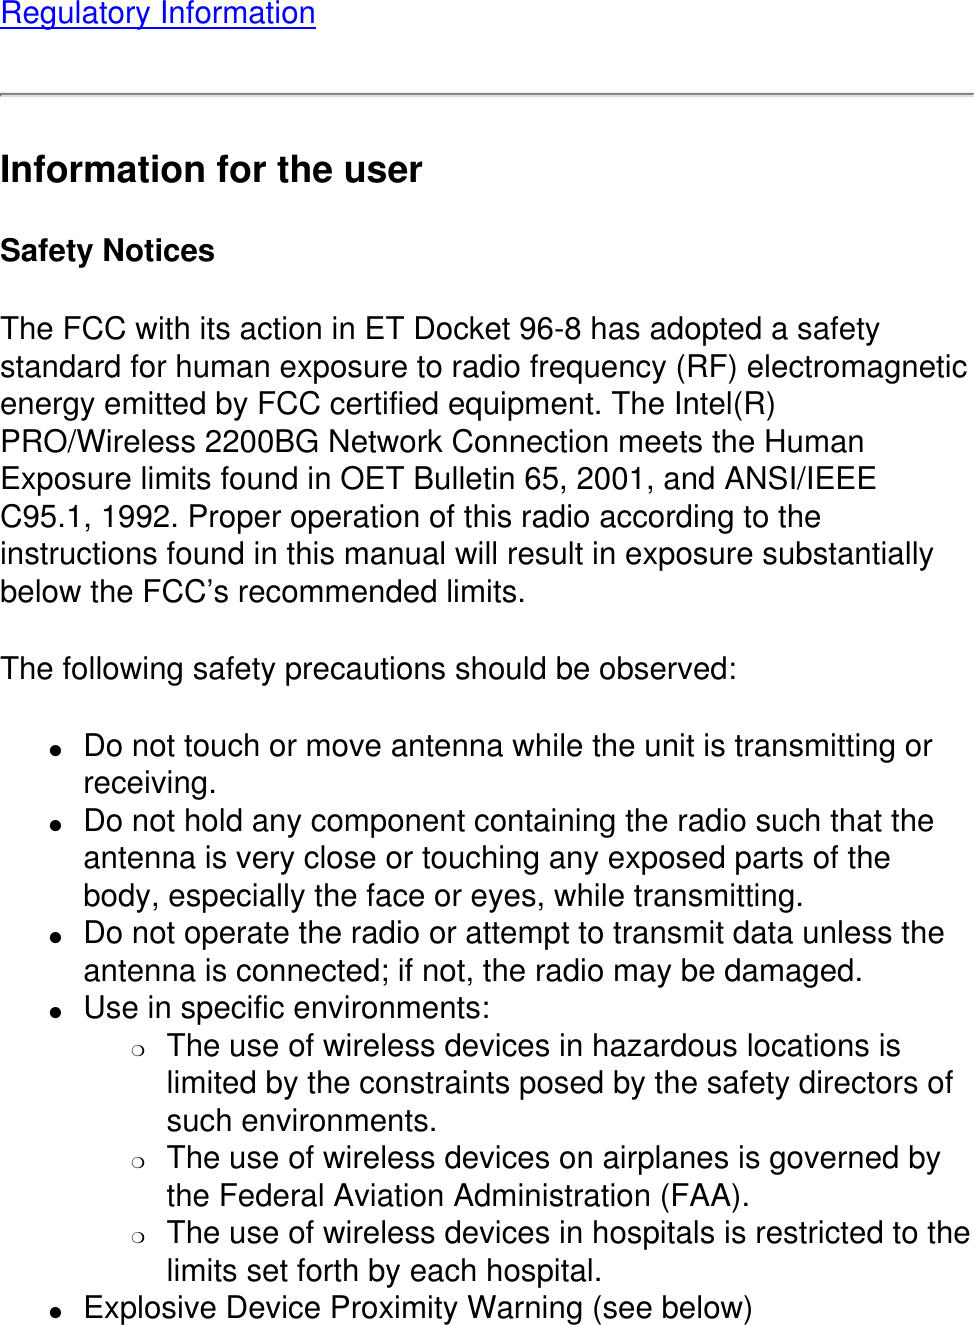 Regulatory InformationInformation for the userSafety NoticesThe FCC with its action in ET Docket 96-8 has adopted a safety standard for human exposure to radio frequency (RF) electromagnetic energy emitted by FCC certified equipment. The Intel(R) PRO/Wireless 2200BG Network Connection meets the Human Exposure limits found in OET Bulletin 65, 2001, and ANSI/IEEE C95.1, 1992. Proper operation of this radio according to the instructions found in this manual will result in exposure substantially below the FCC’s recommended limits.The following safety precautions should be observed:●     Do not touch or move antenna while the unit is transmitting or receiving. ●     Do not hold any component containing the radio such that the antenna is very close or touching any exposed parts of the body, especially the face or eyes, while transmitting. ●     Do not operate the radio or attempt to transmit data unless the antenna is connected; if not, the radio may be damaged. ●     Use in specific environments: ❍     The use of wireless devices in hazardous locations is limited by the constraints posed by the safety directors of such environments. ❍     The use of wireless devices on airplanes is governed by the Federal Aviation Administration (FAA). ❍     The use of wireless devices in hospitals is restricted to the limits set forth by each hospital.●     Explosive Device Proximity Warning (see below) 